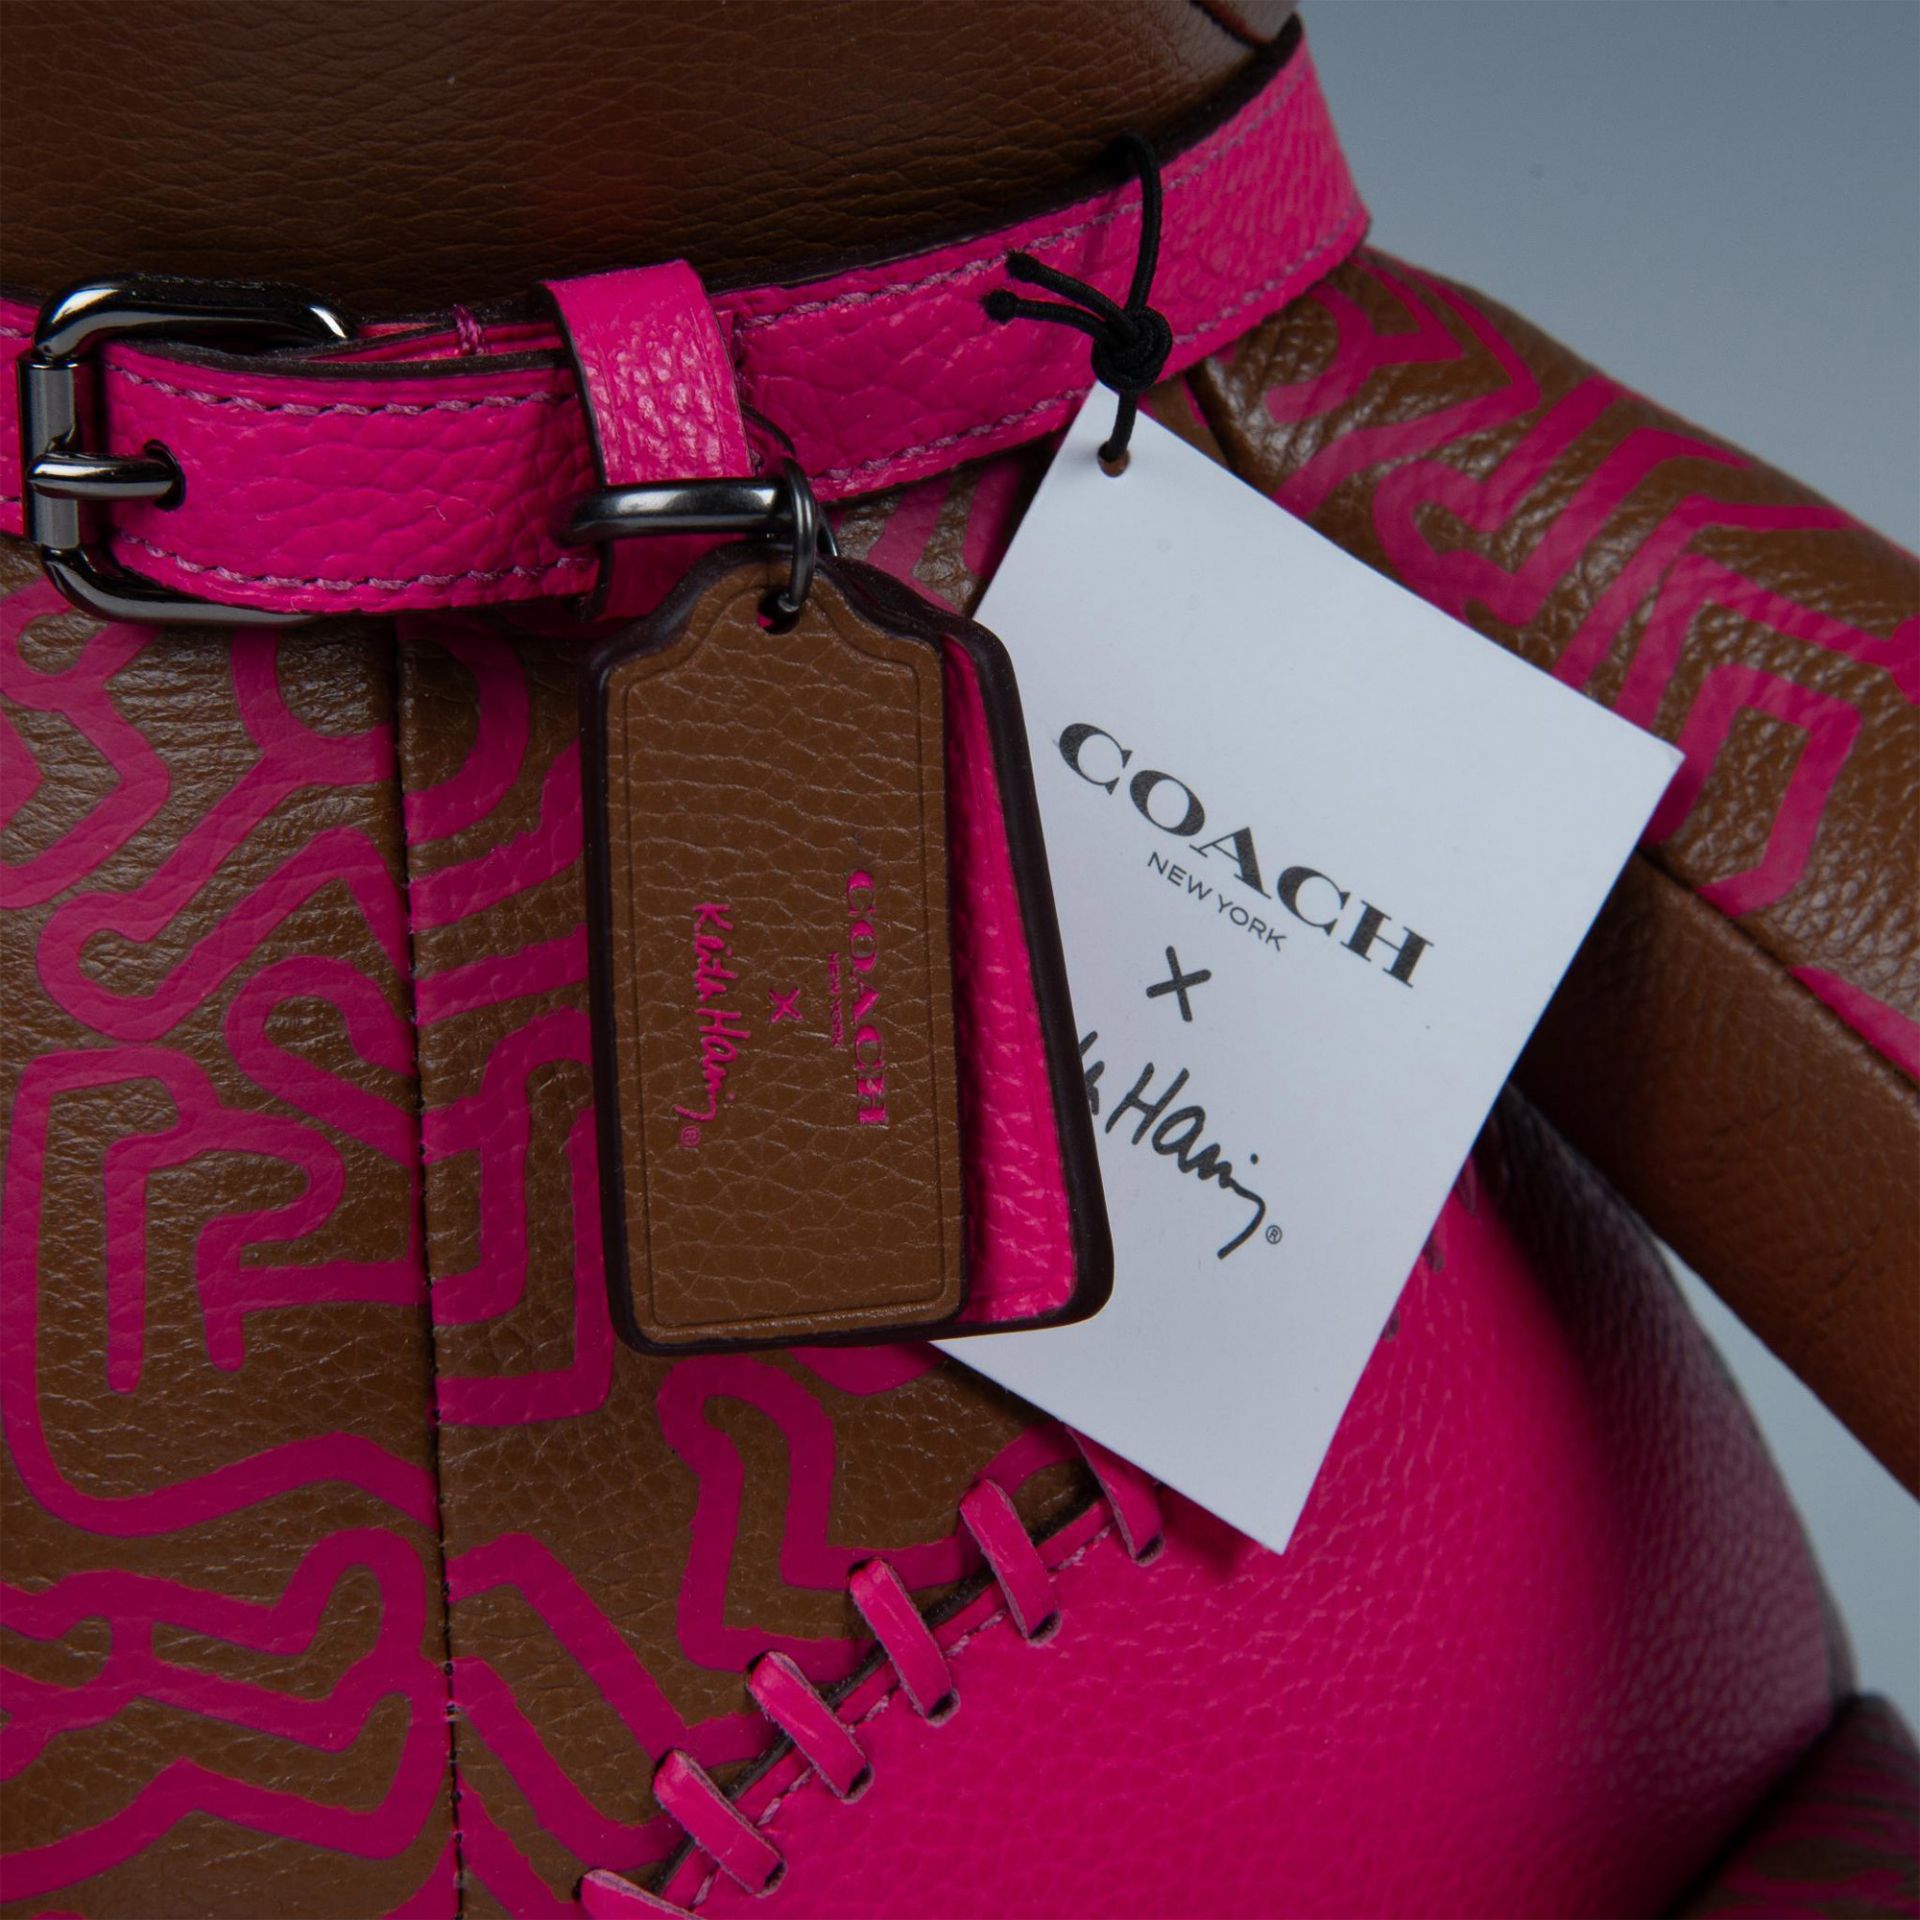 Coach Keith Haring Collaboration Plush Leather Teddy Bear - Image 3 of 7